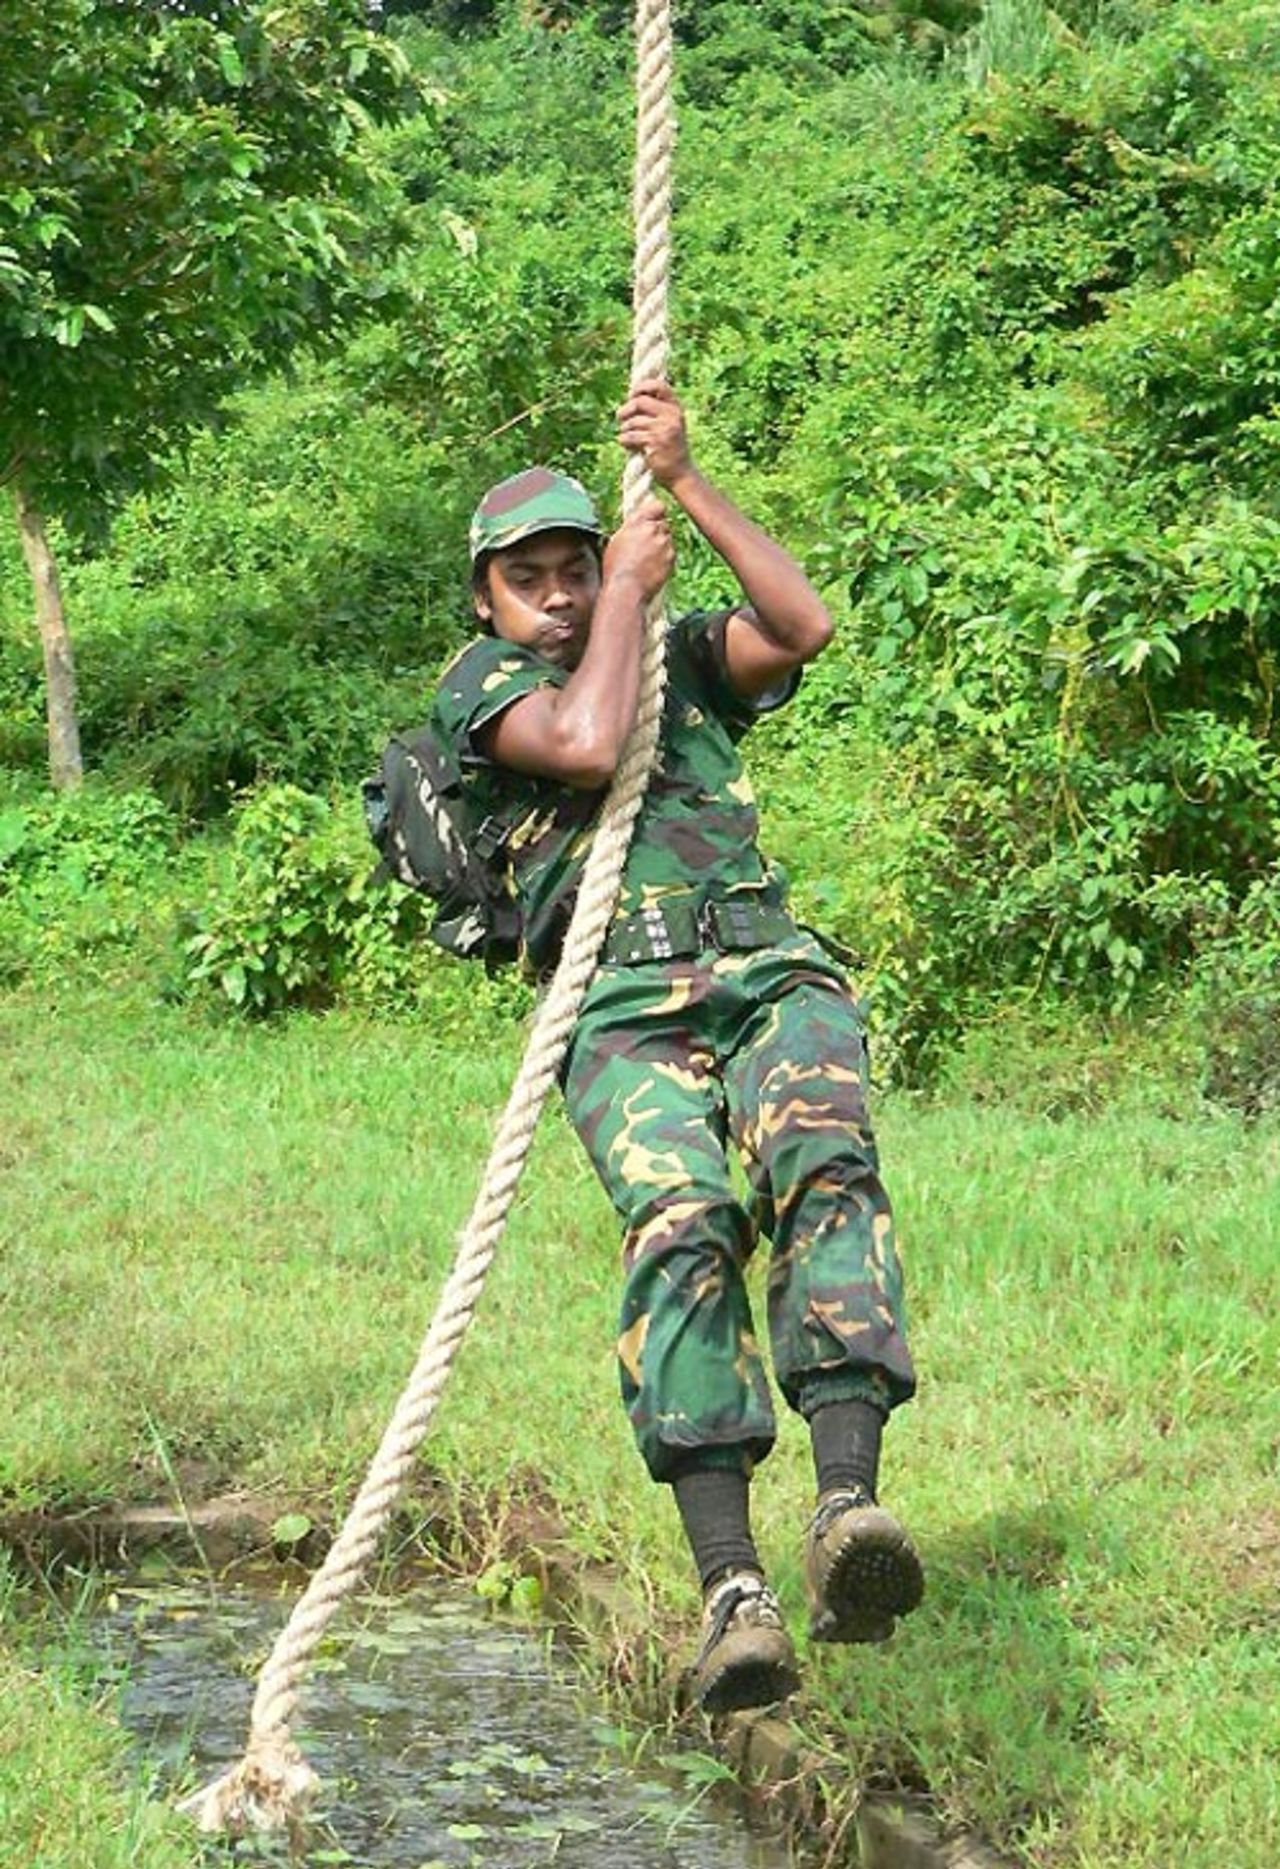 Syed Rasel completes a tarzan swing at the School of Infantry and Tactics, Sylhet, August 14, 2007 